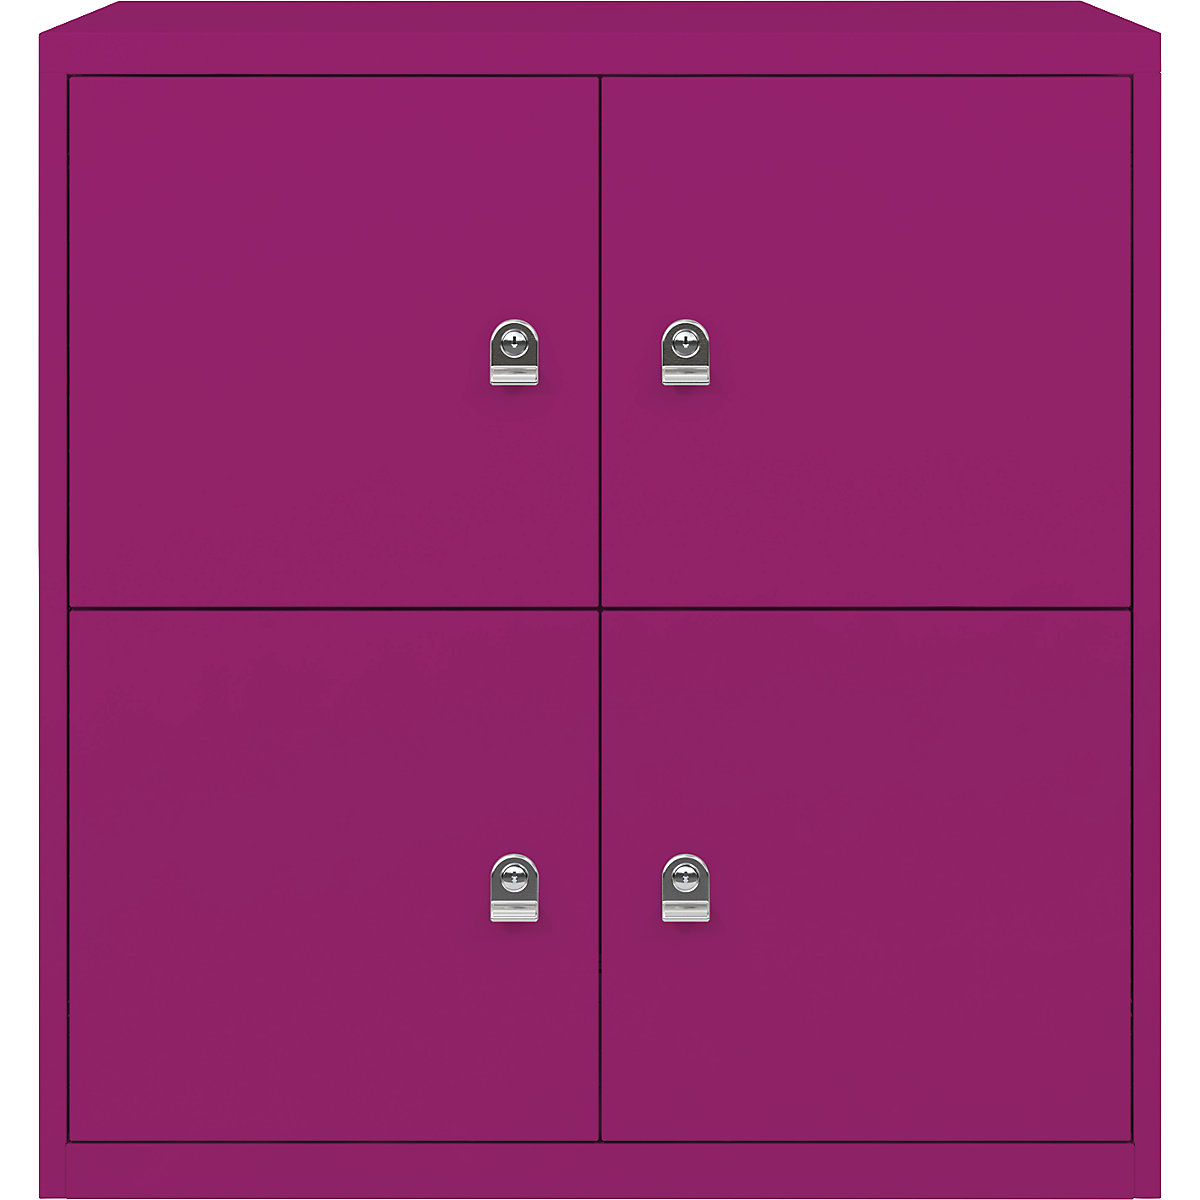 BISLEY – LateralFile™ lodge, with 4 lockable compartments, height 375 mm each, fuchsia